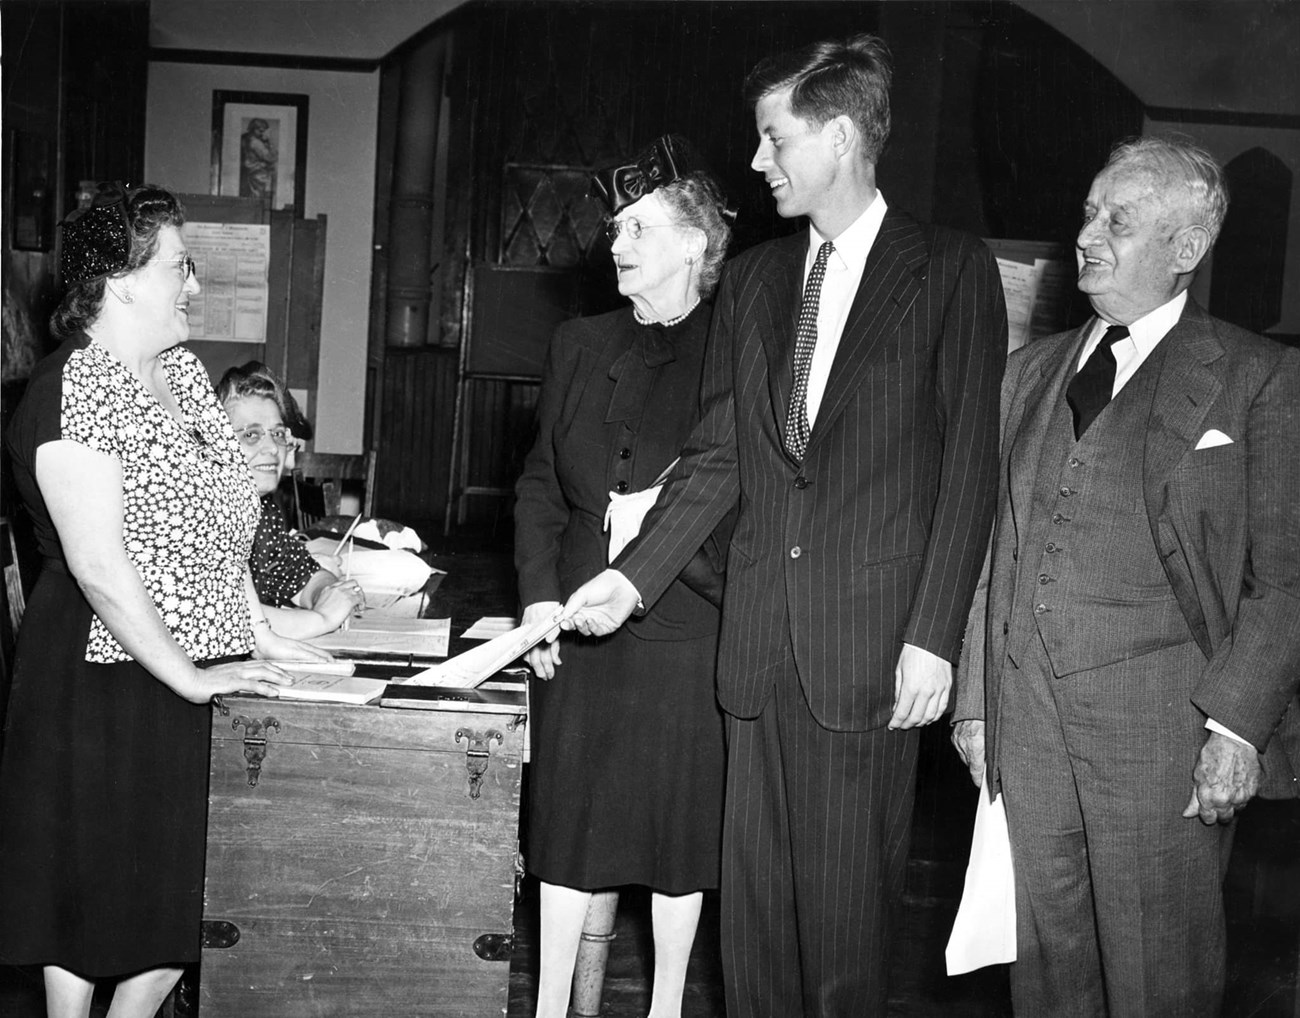 John F. Kennedy (center) drops a ballot into a wooden ballot box.  He is wearing a dark suit.  He is flanked by his grandparents.